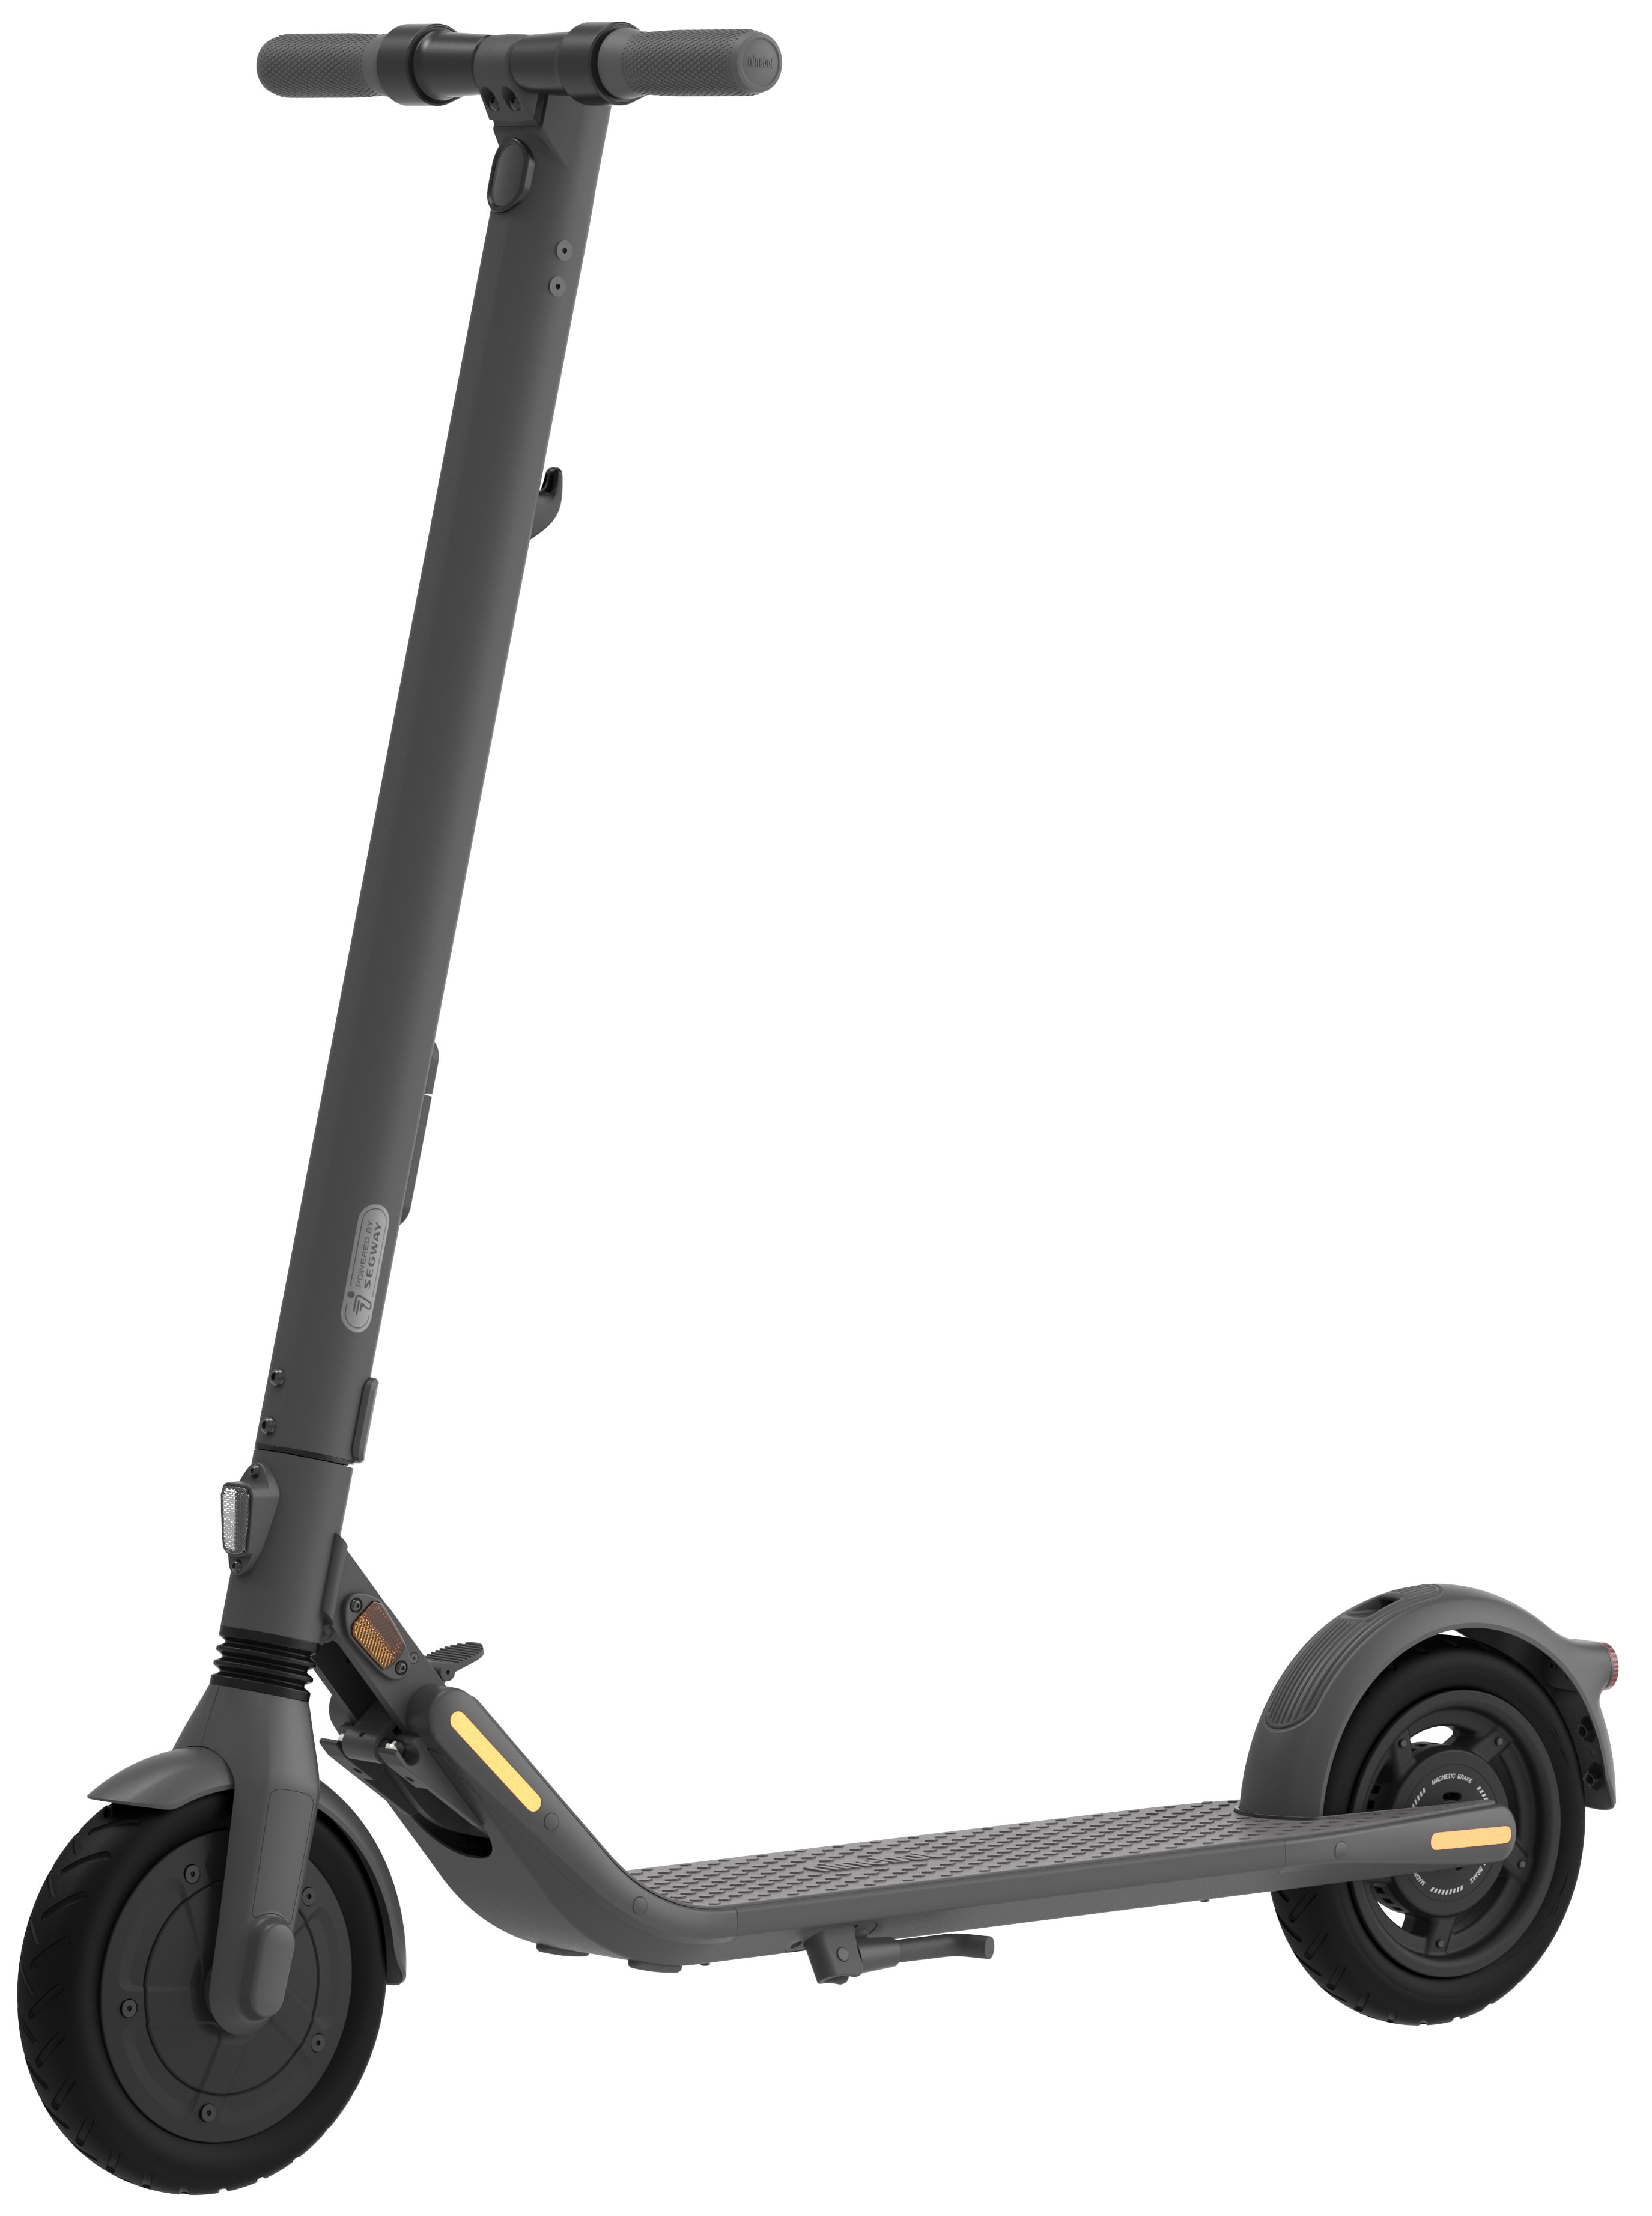 Ninebot E25a Electric Kick Scooter Electric, Upgraded Motor Power, Dual Density Tires, Lightweight and Foldable -